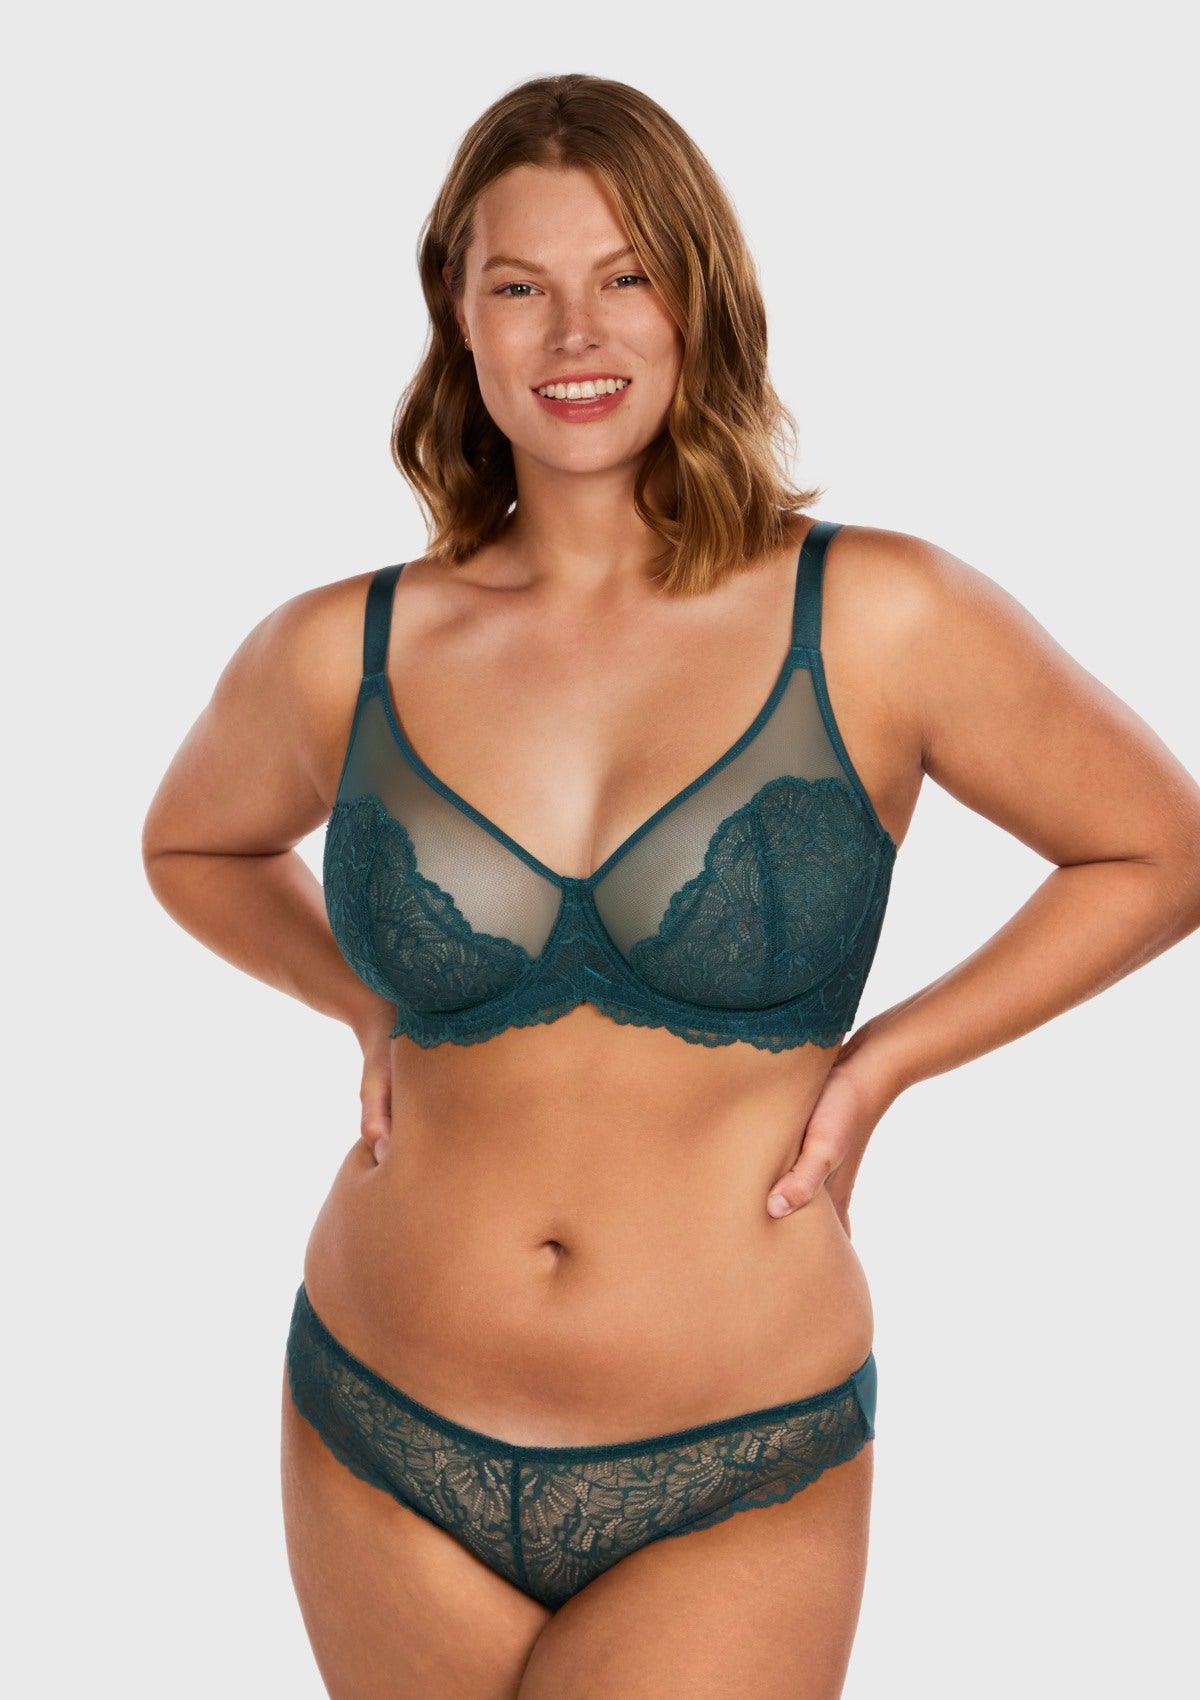 HSIA Blossom Full Figure See-Through Lace Bra For Side And Back Fat - Balsam Blue / 46 / D